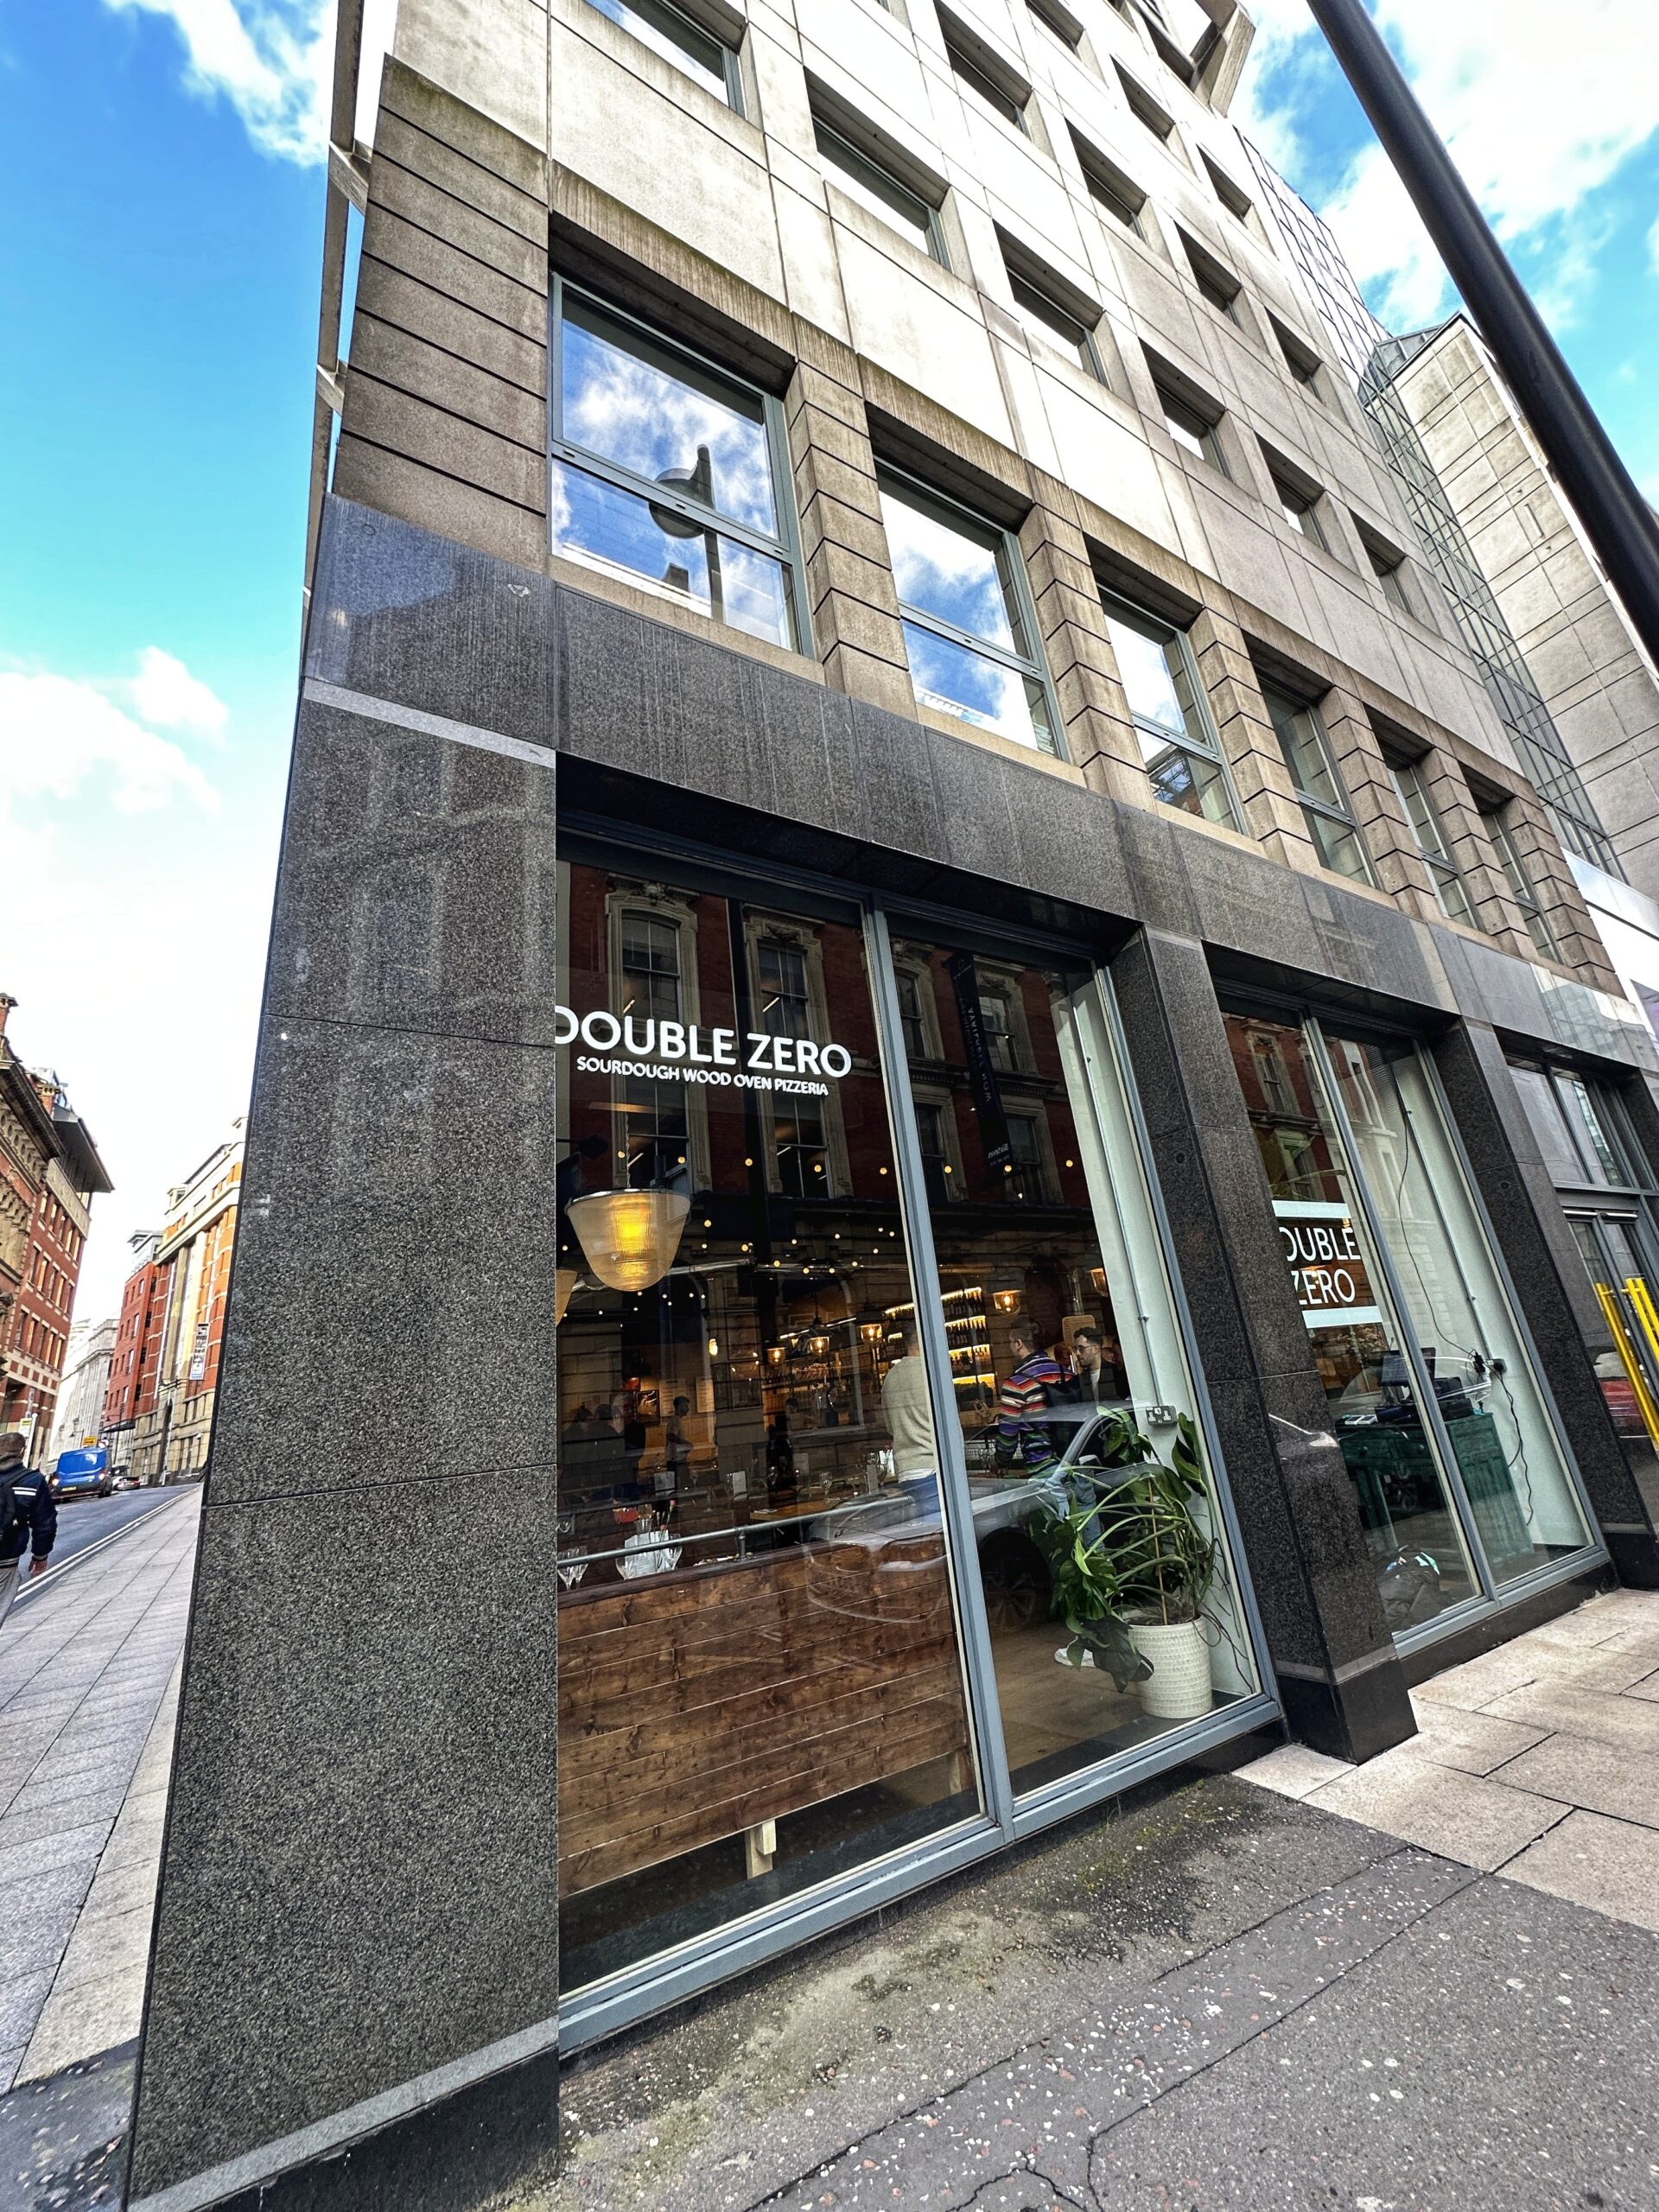 Double Zero is ready to open its first pizzeria in Manchester city centre